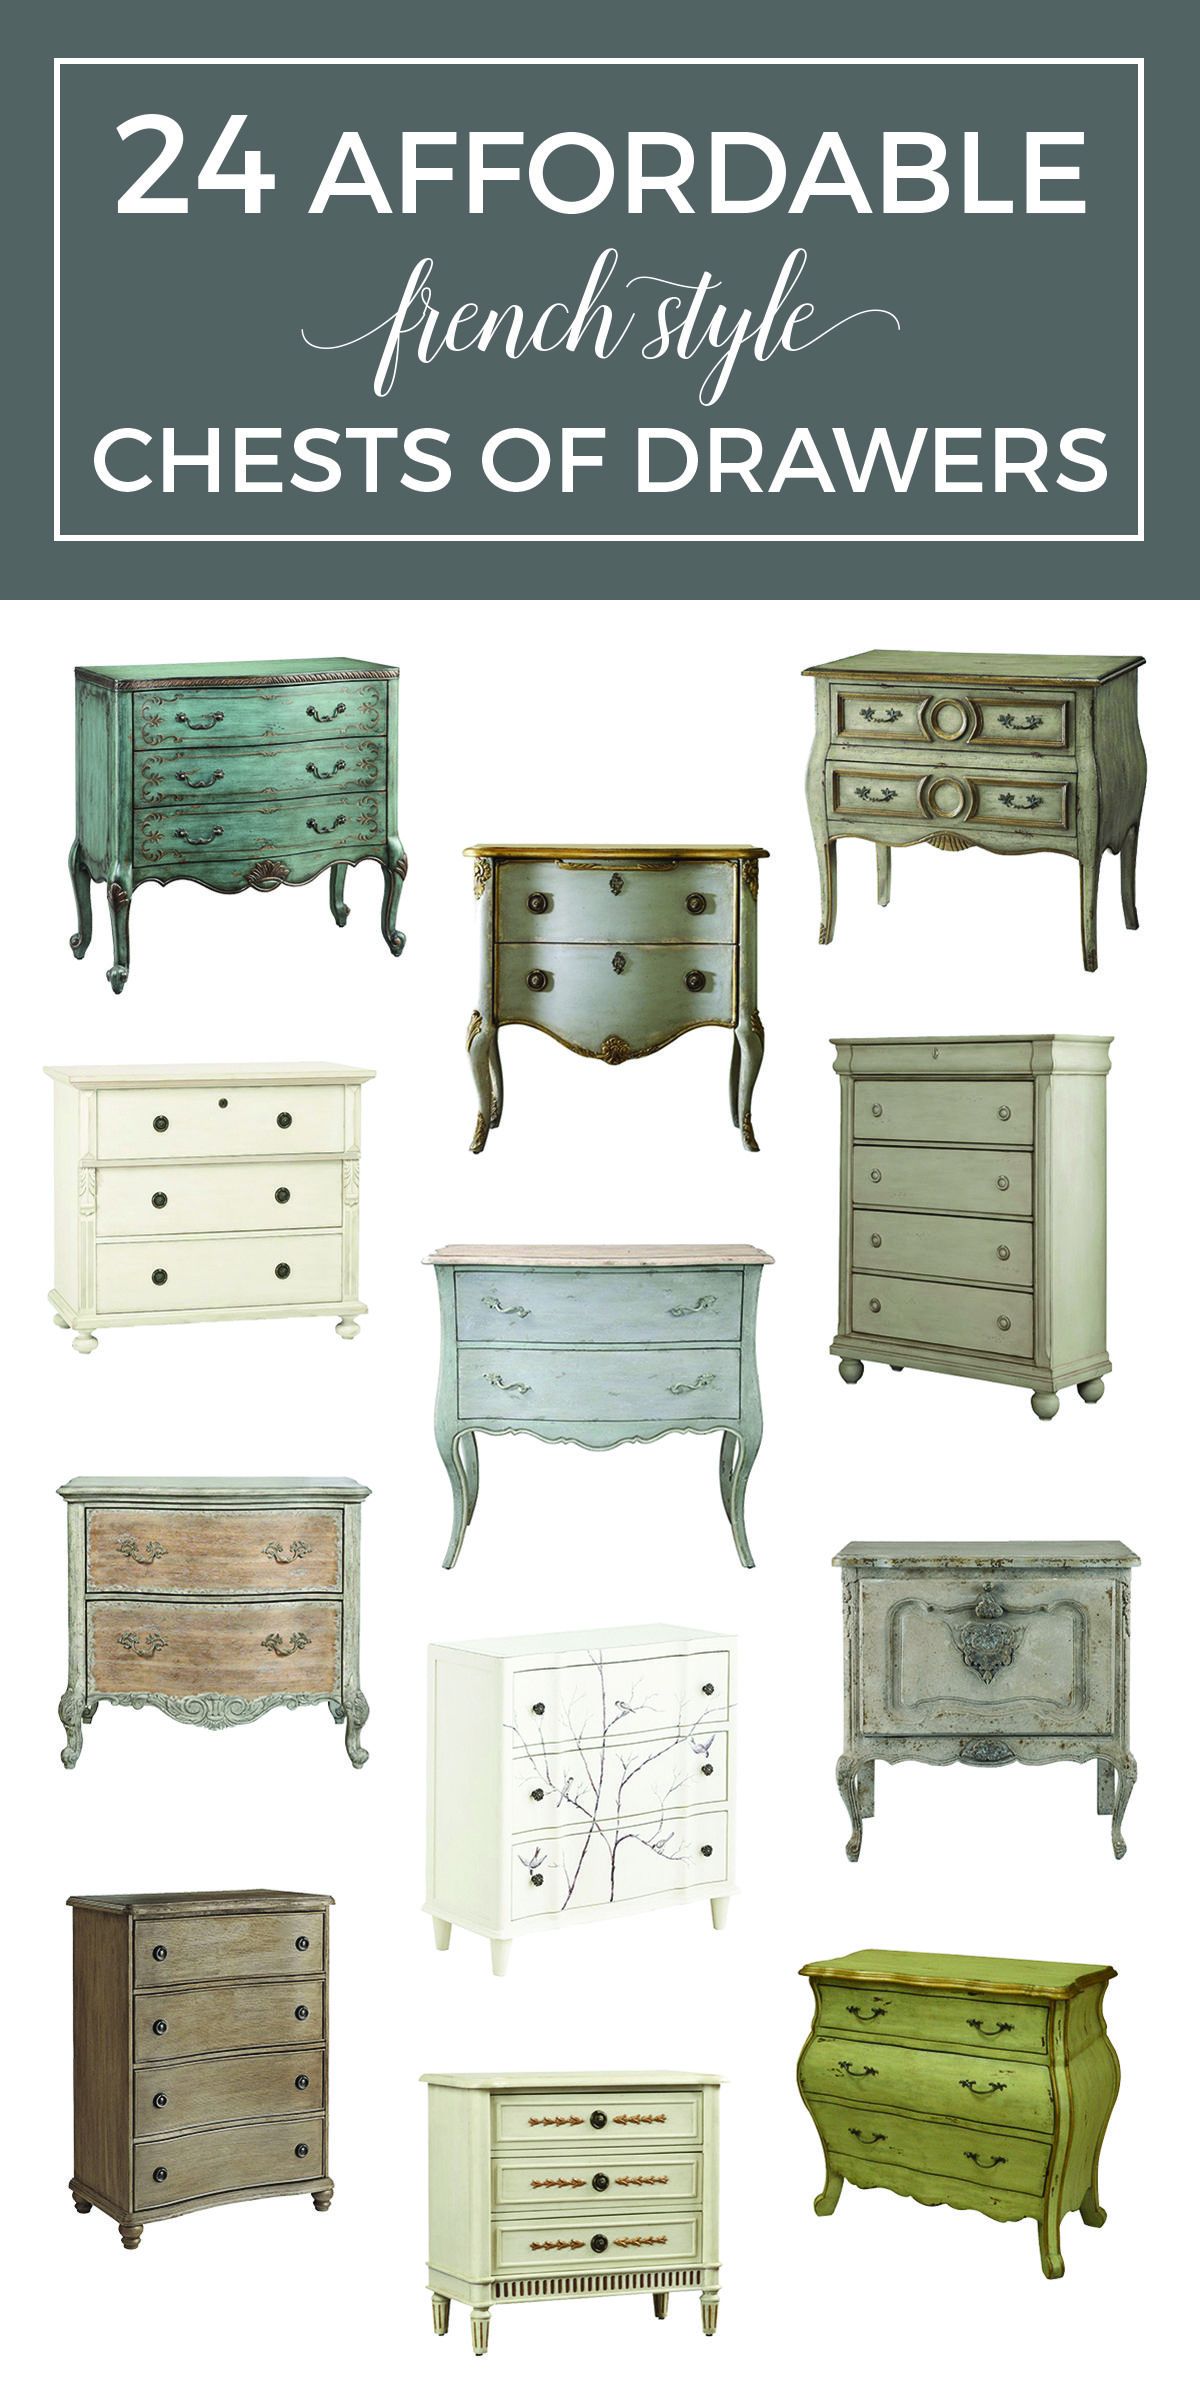 The French Dresser: 24 Affordable French Style Chests of Drawers -   23 french style furniture
 ideas